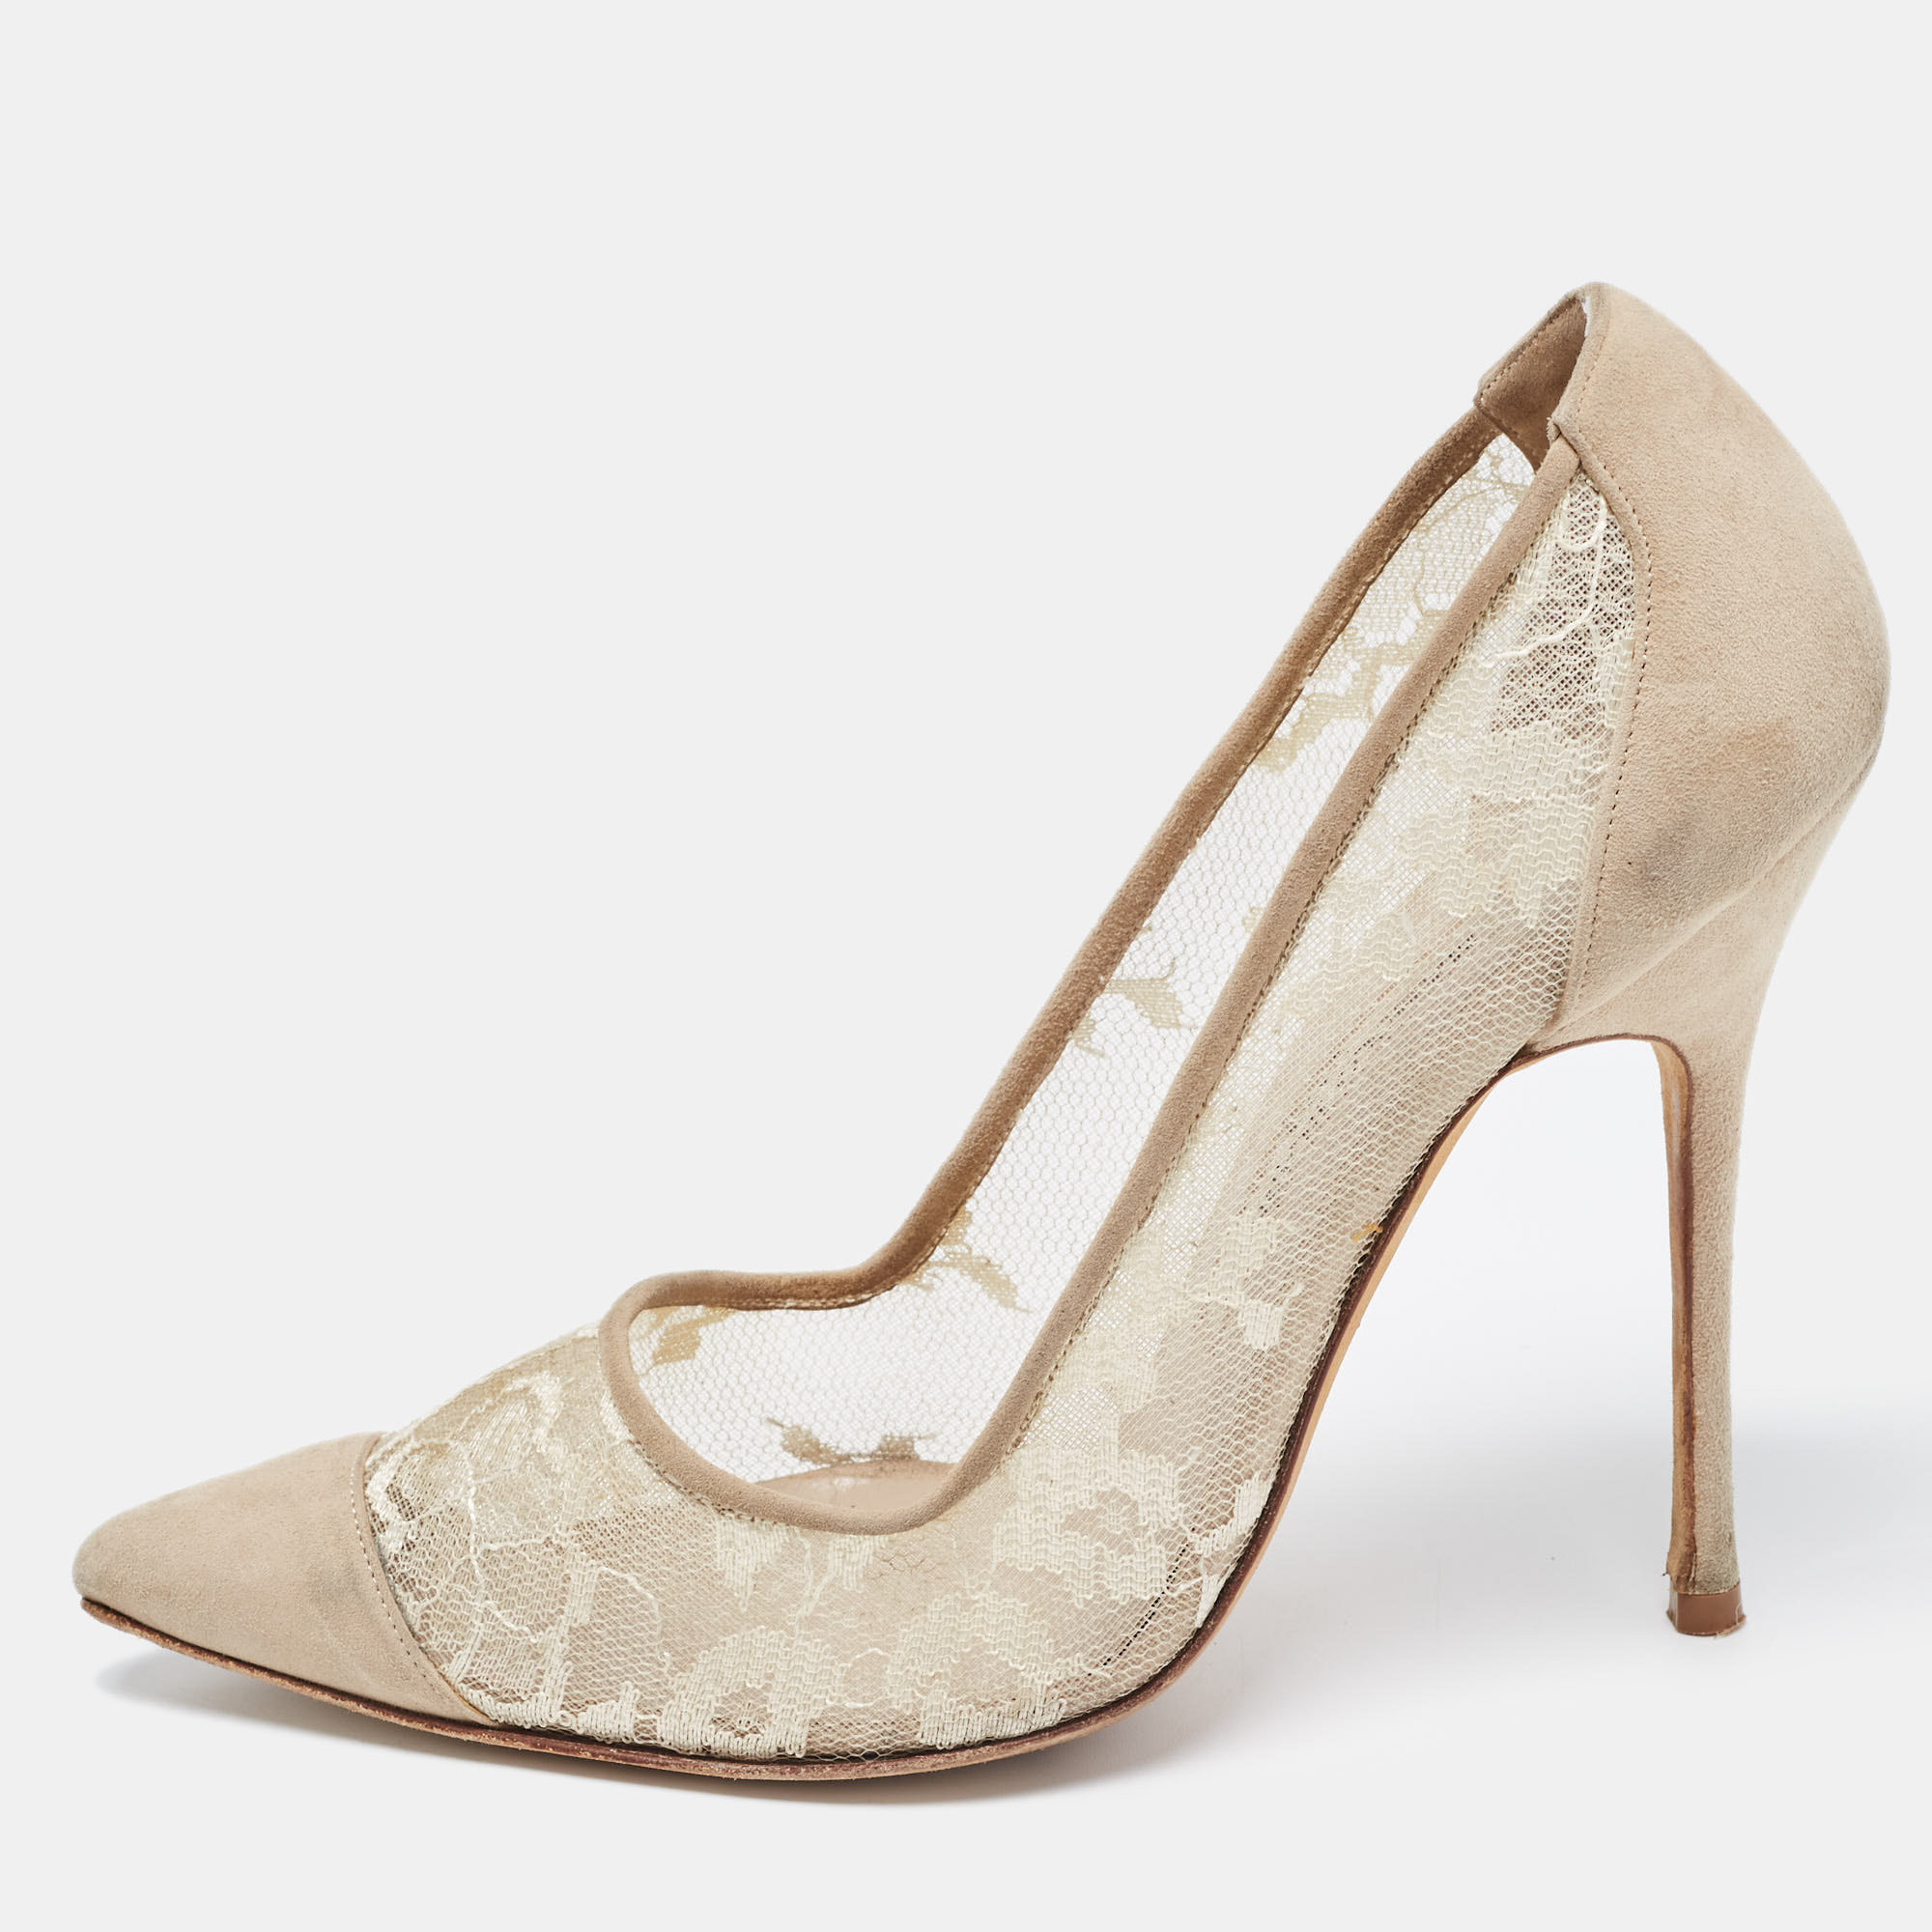 Manolo Blahnik Cream Suede And Mesh Pointed Toe Pumps Size 37